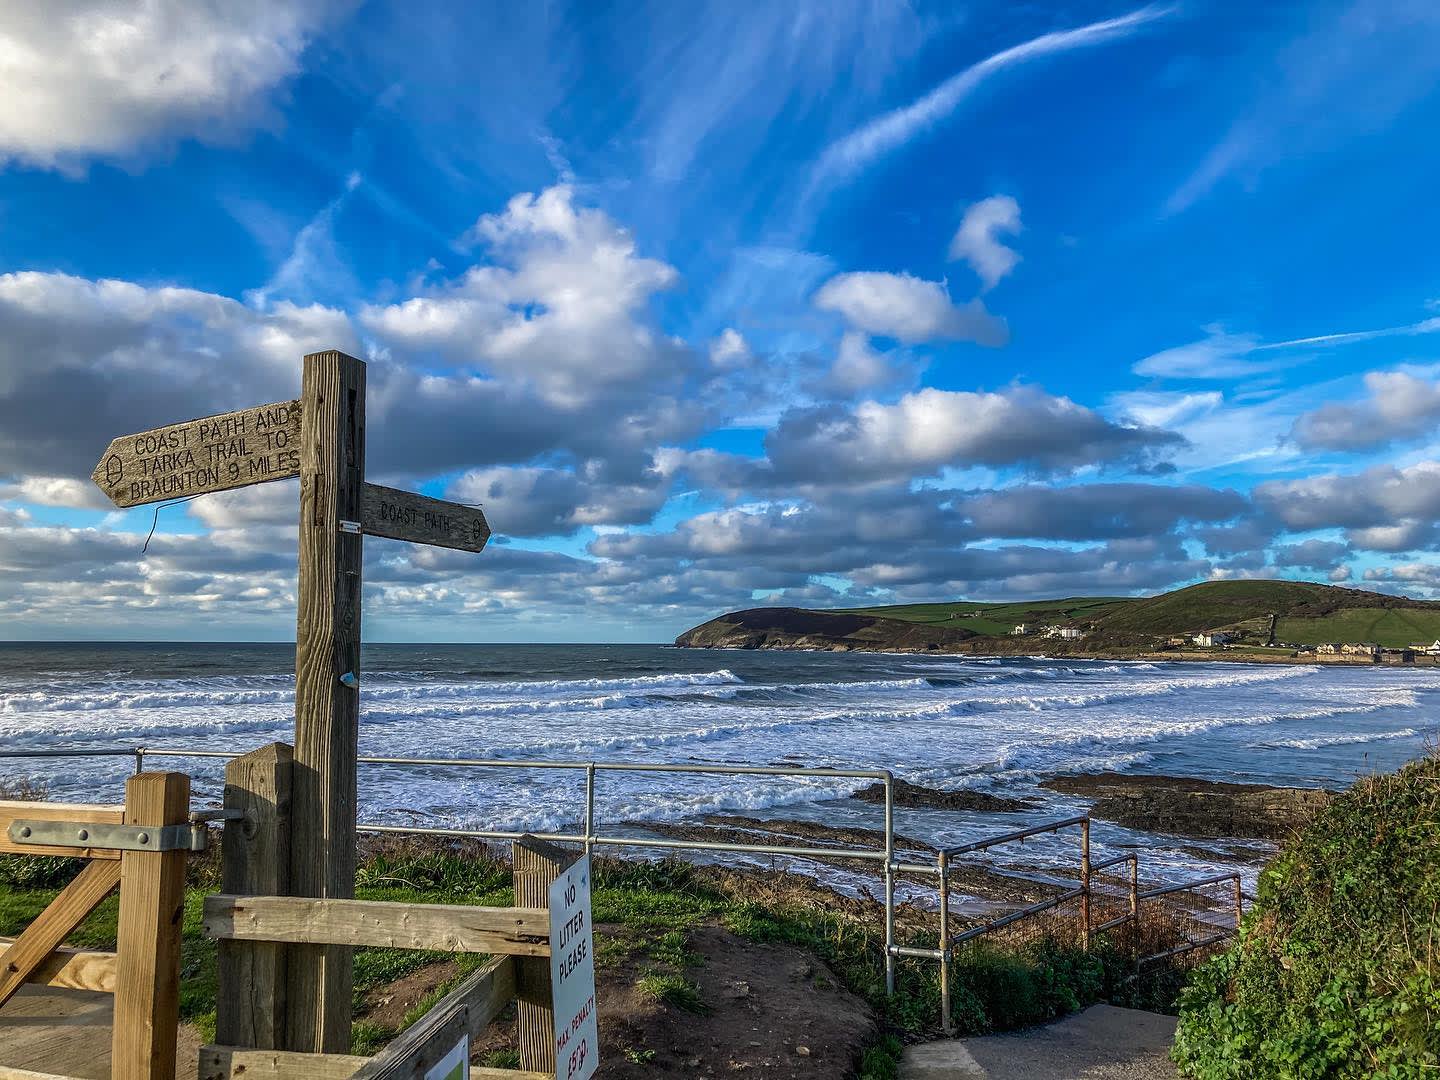 View of Croyde Bay with coastal path signs